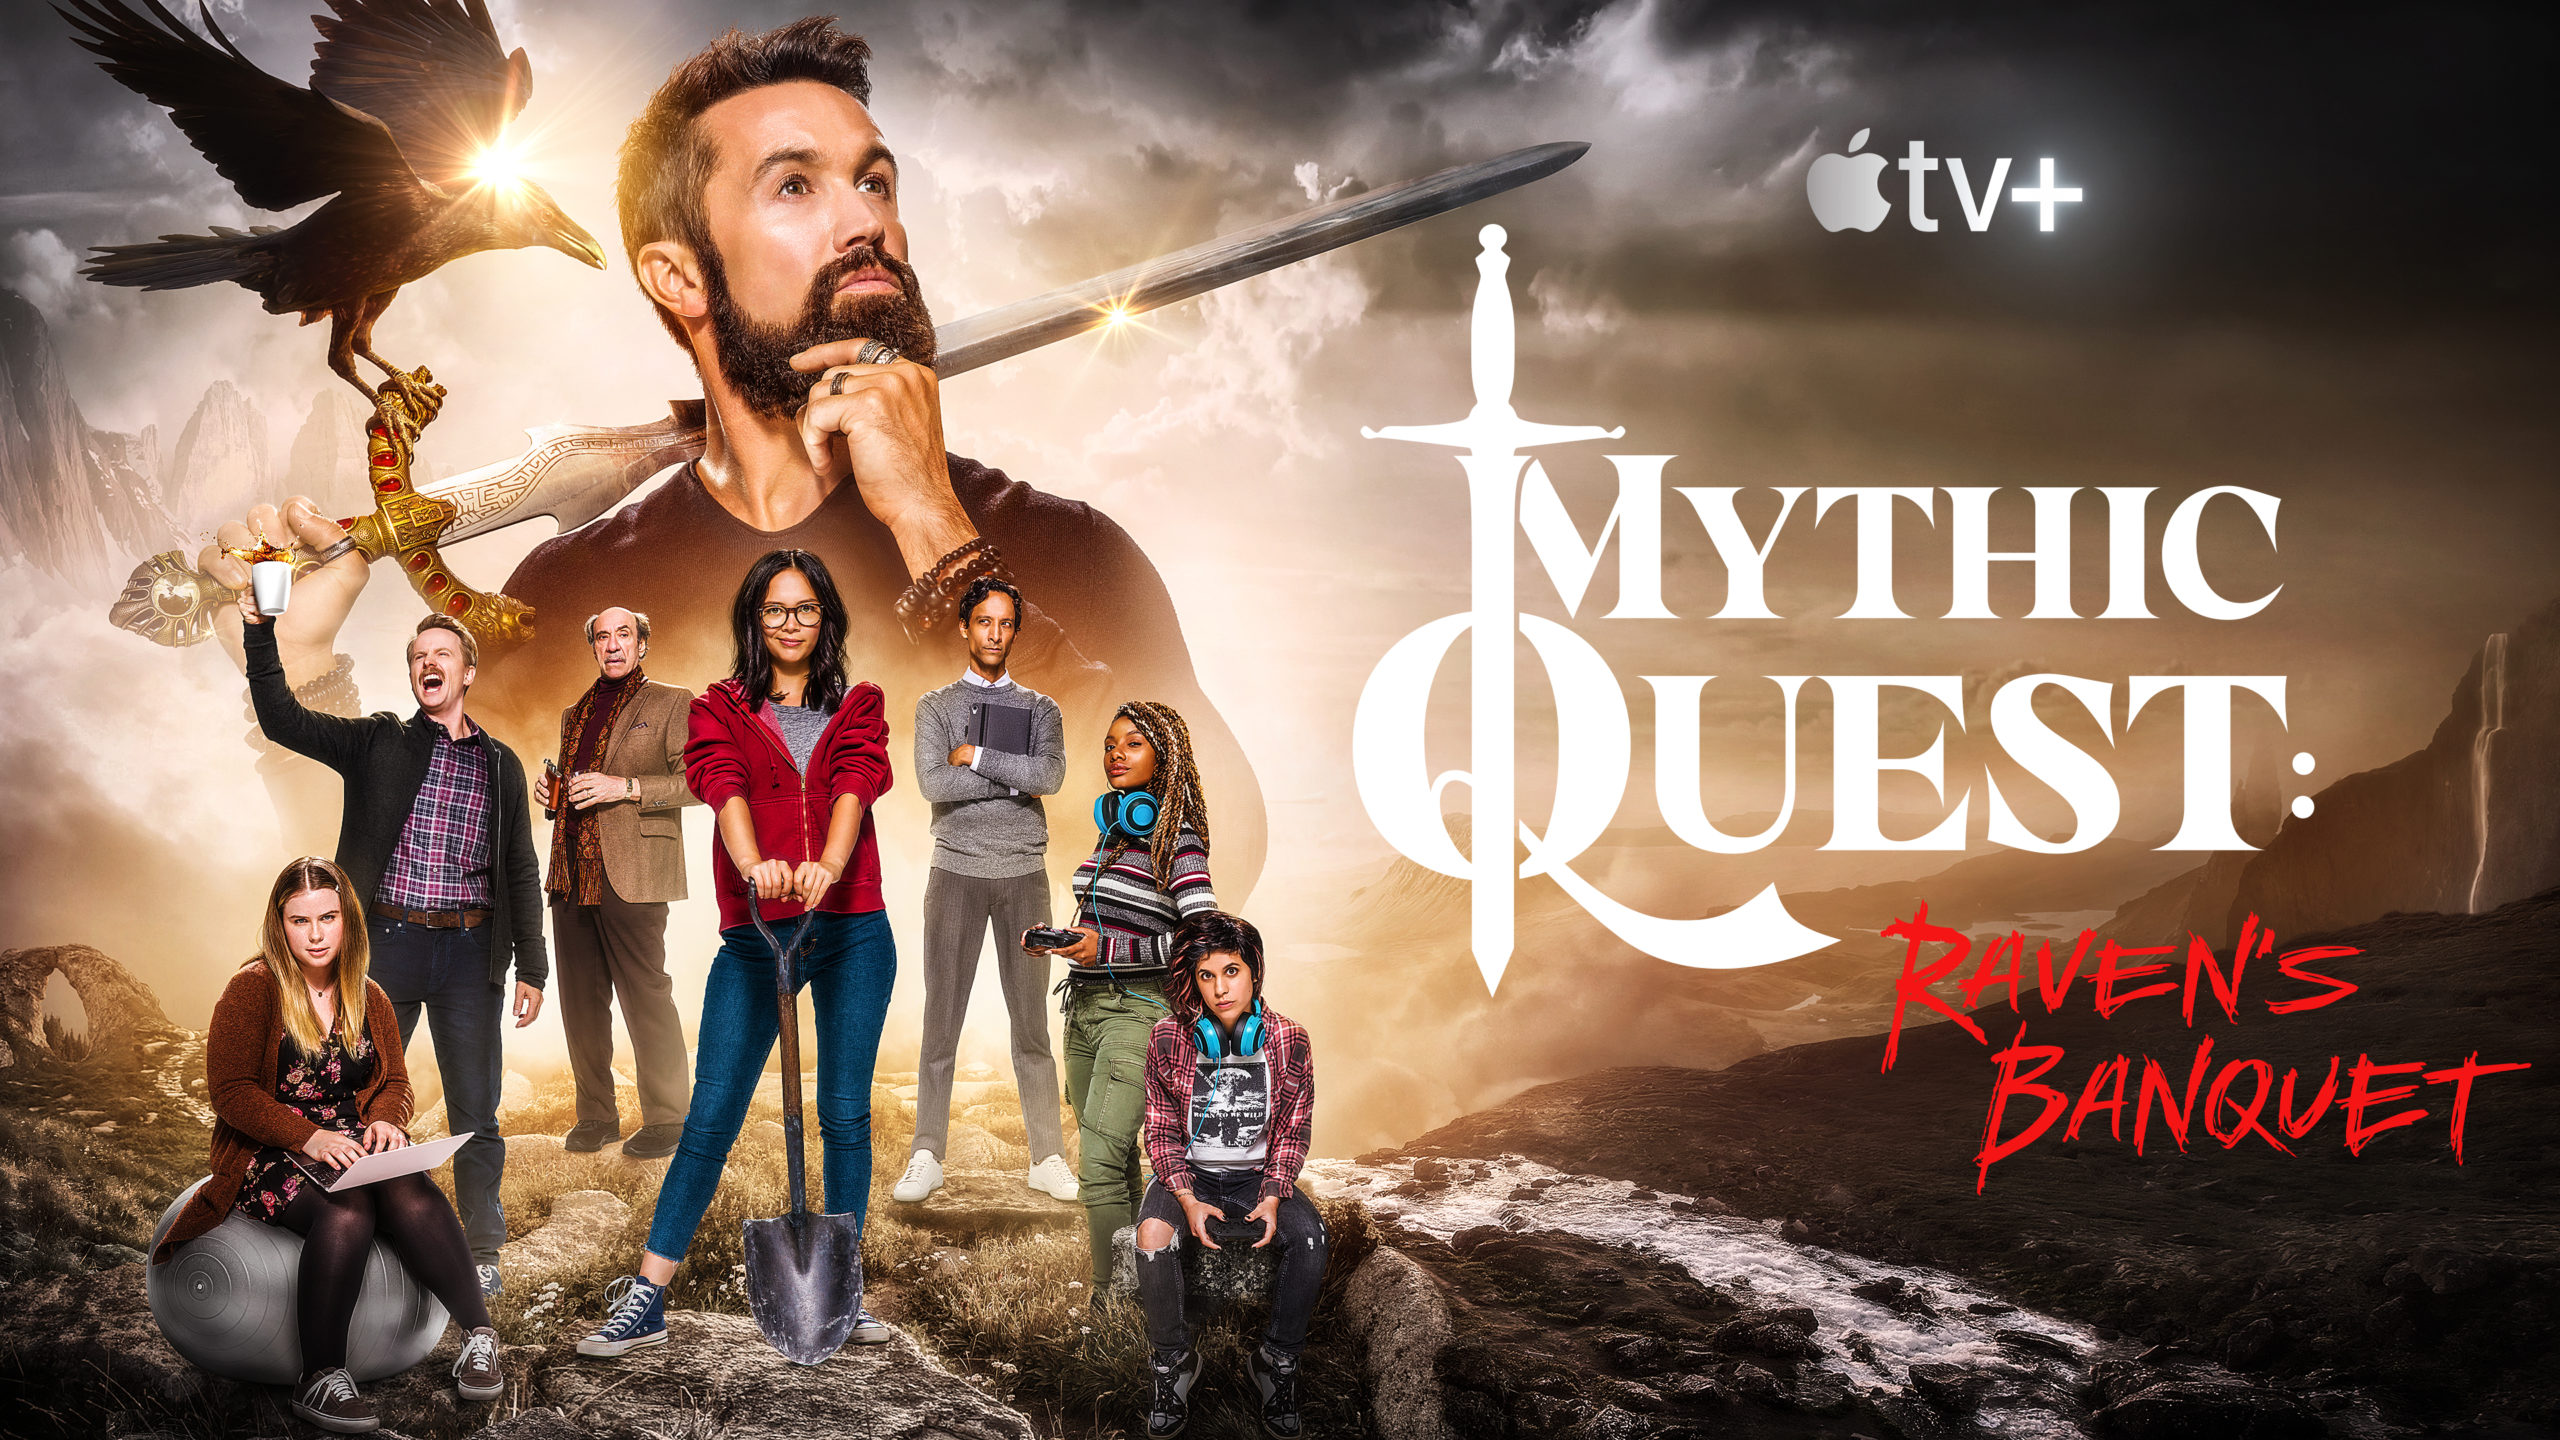 ‘Mythic Quest’ To Begin Filming Season 2 This Month